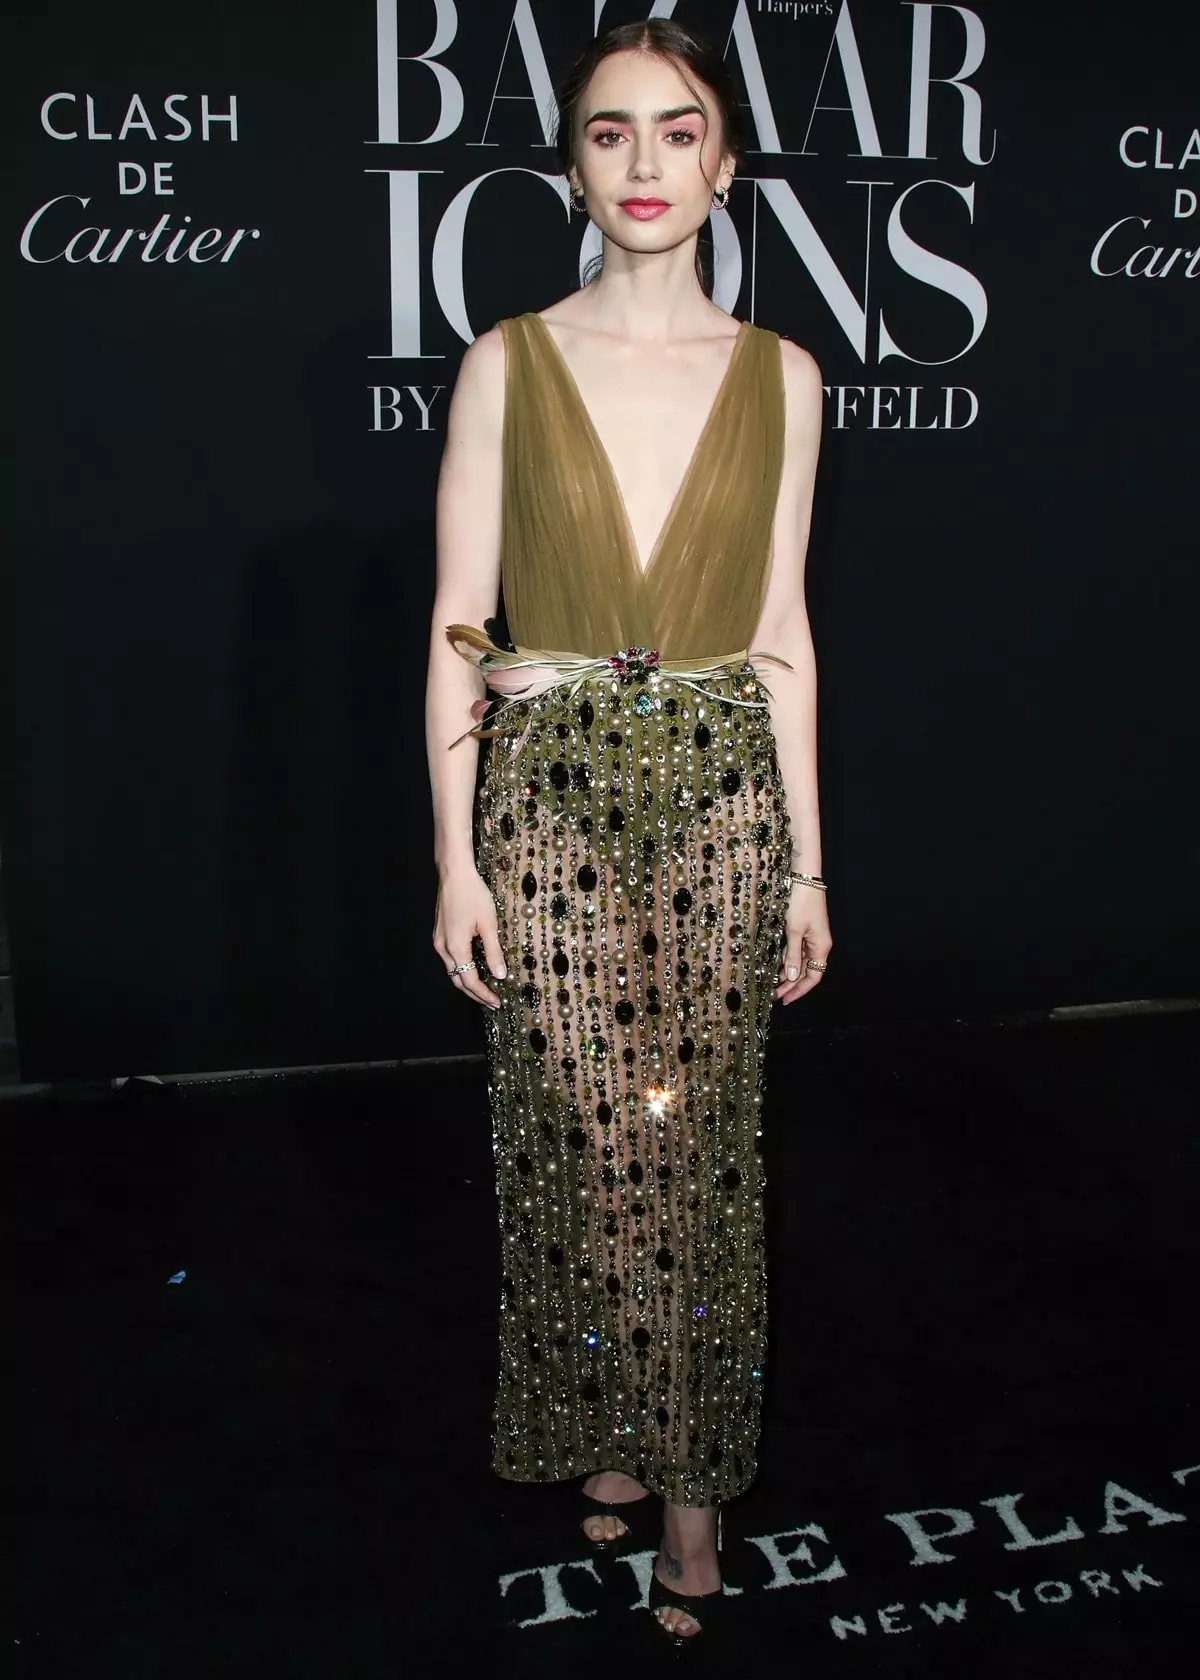 Lily Collins in a Georges Hobeika Fall 2019 Couture dress and Jimmy Choo Pattie platform sandals arrives at the 2019 Harper's BAZAAR Celebration of 'ICONS By Carine Roitfeld' held at The Plaza Hotel on September 6, 2019, in Manhattan, New York City